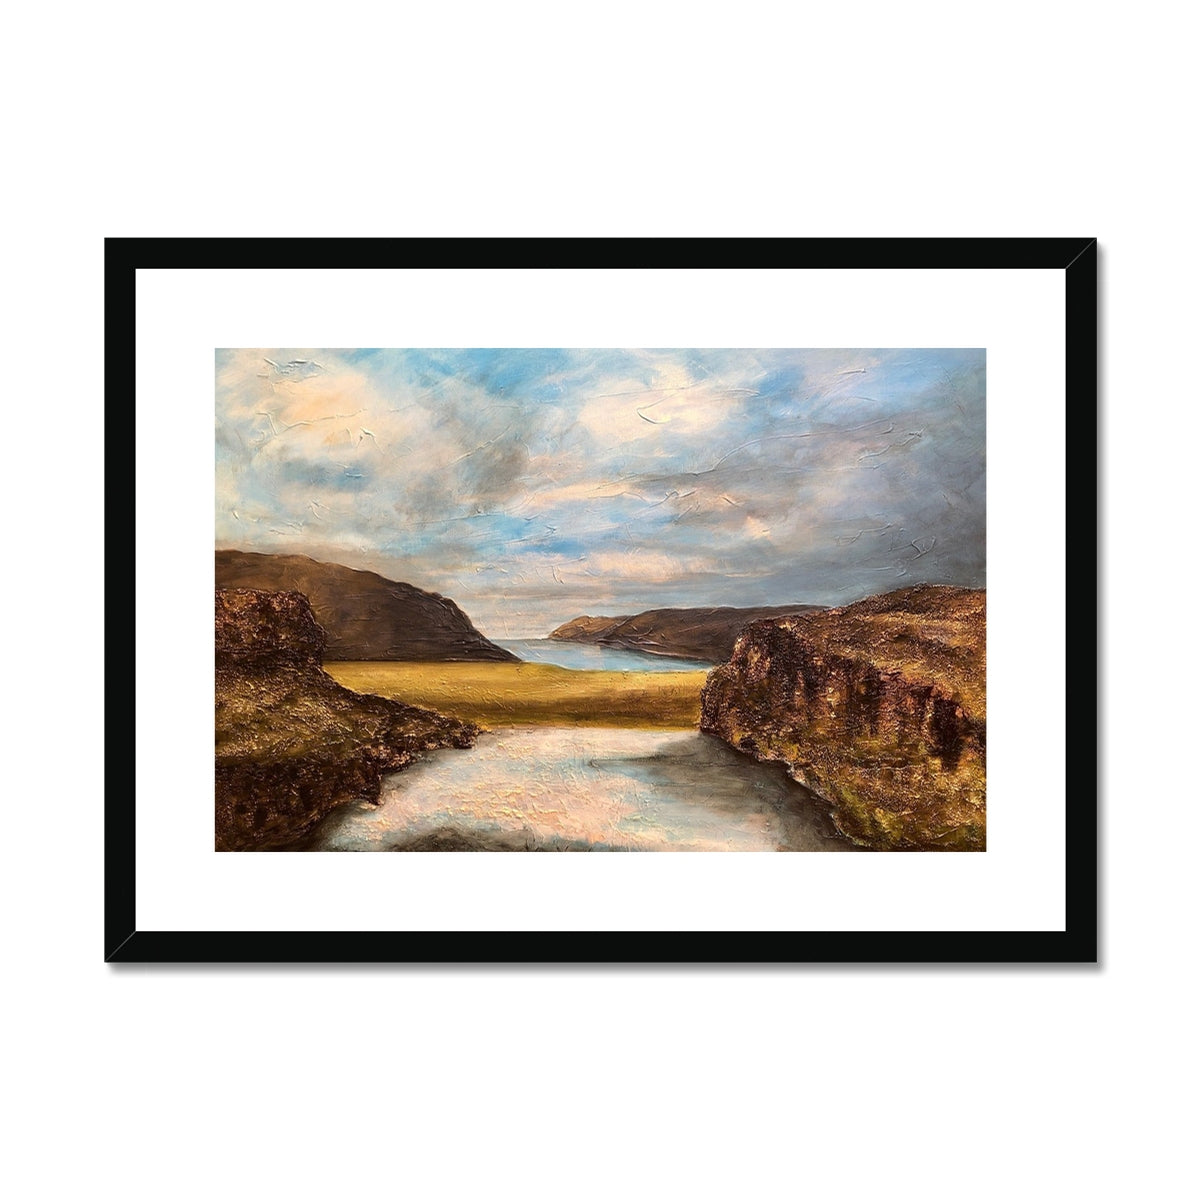 Westfjords Iceland Painting | Framed & Mounted Prints From Scotland-Framed & Mounted Prints-World Art Gallery-A2 Landscape-Black Frame-Paintings, Prints, Homeware, Art Gifts From Scotland By Scottish Artist Kevin Hunter